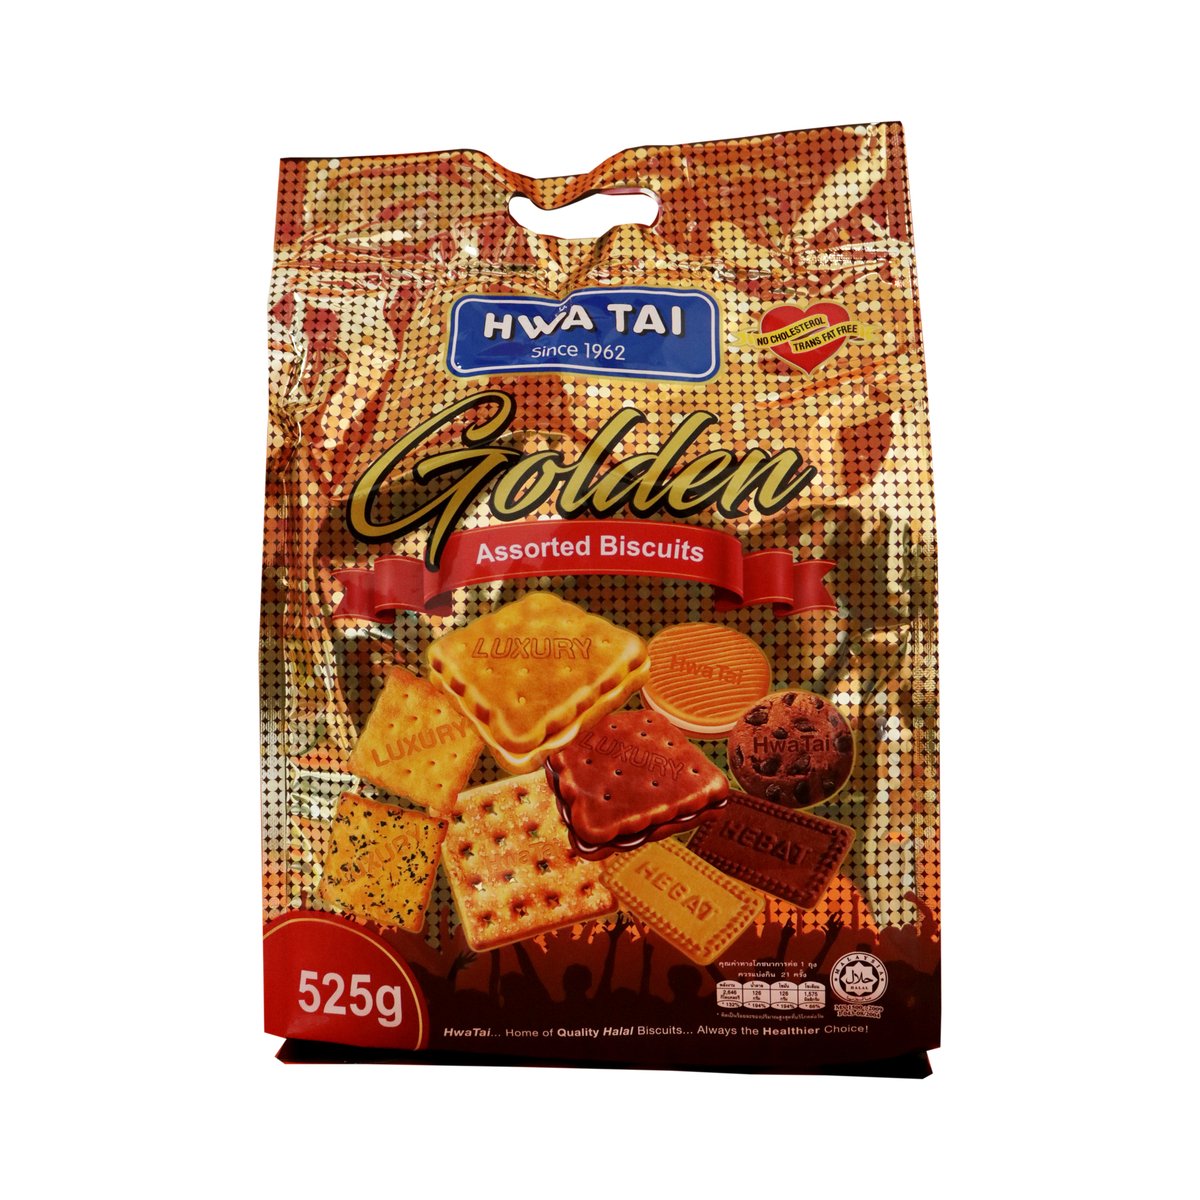 Hwa Tai Biscuit Golden Assorted 505g